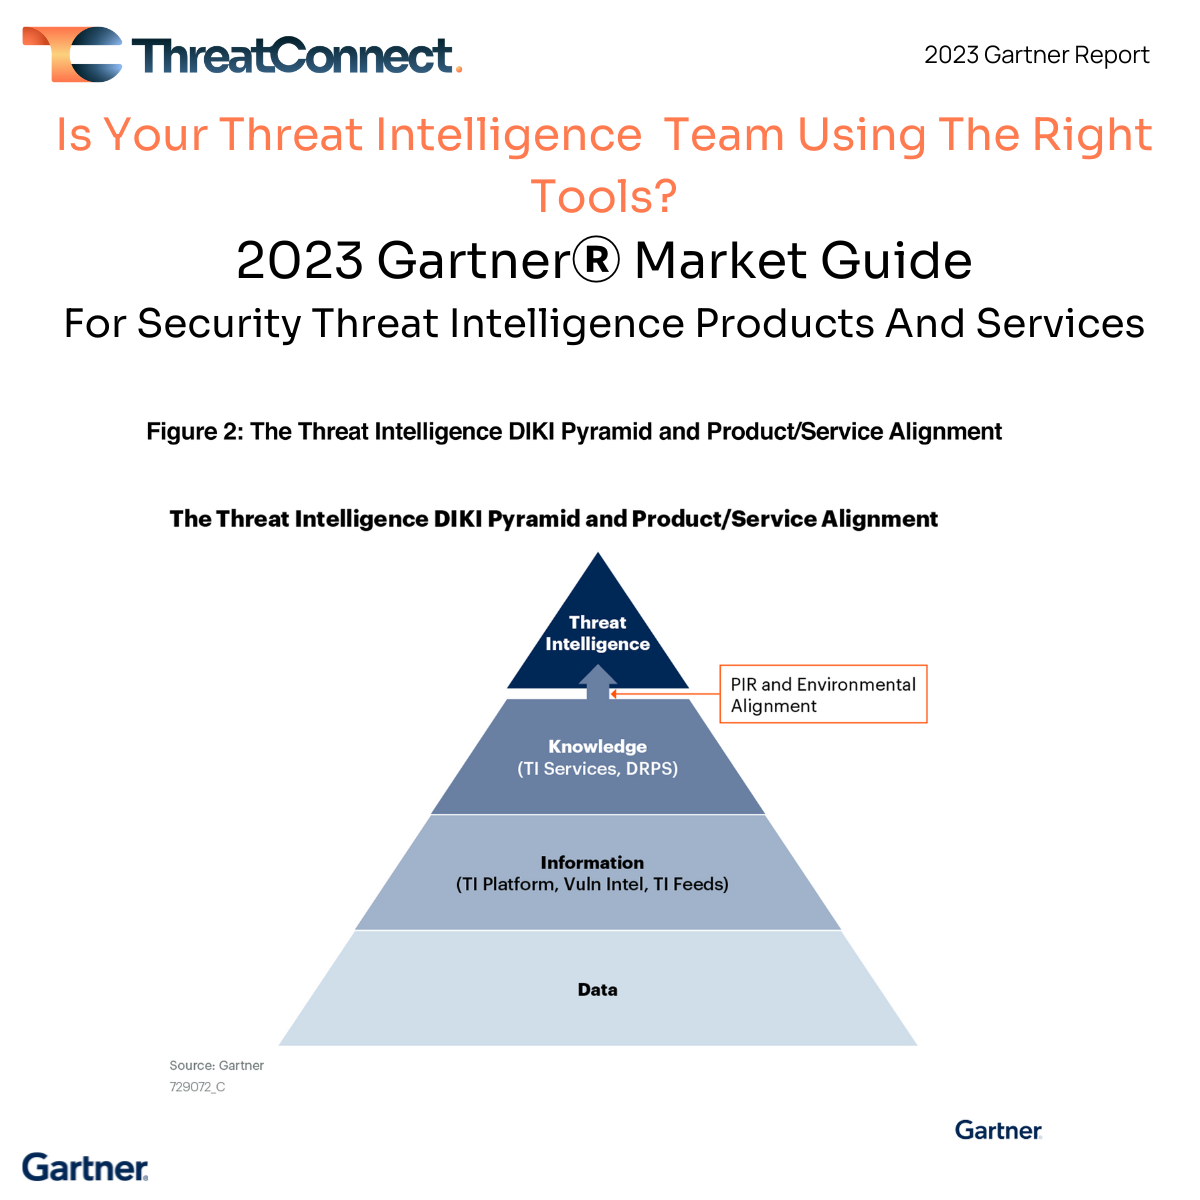 Our Take on the Latest Gartner Market Guide ThreatConnect